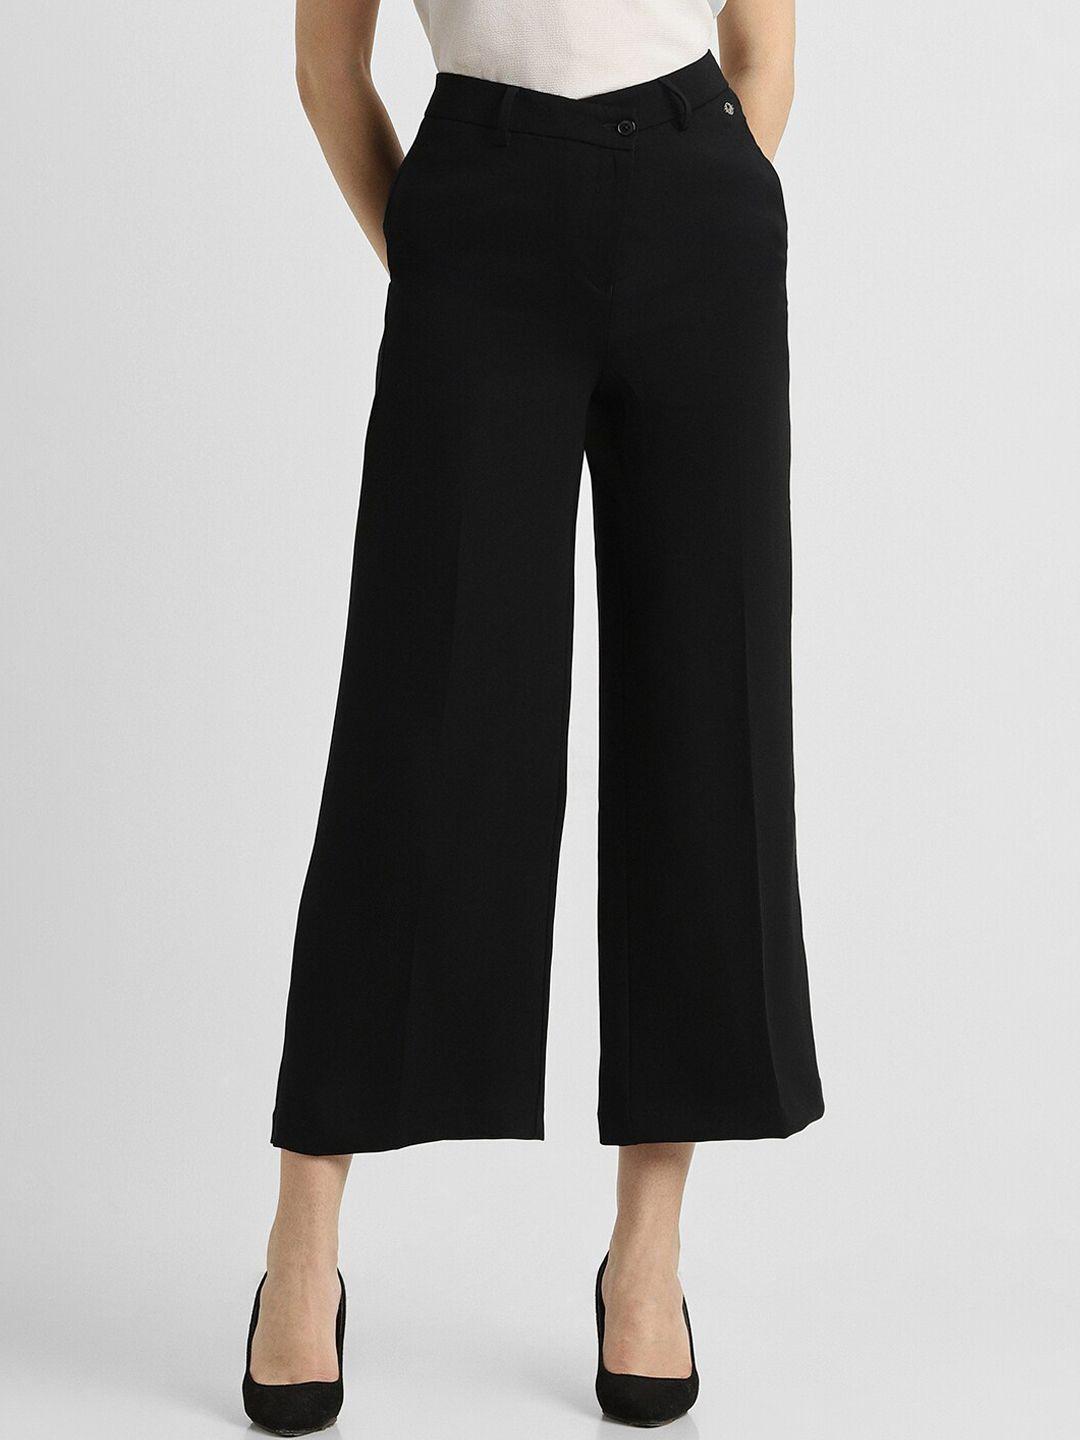 Allen Solly Woman Mid-Rise Parallel Trousers